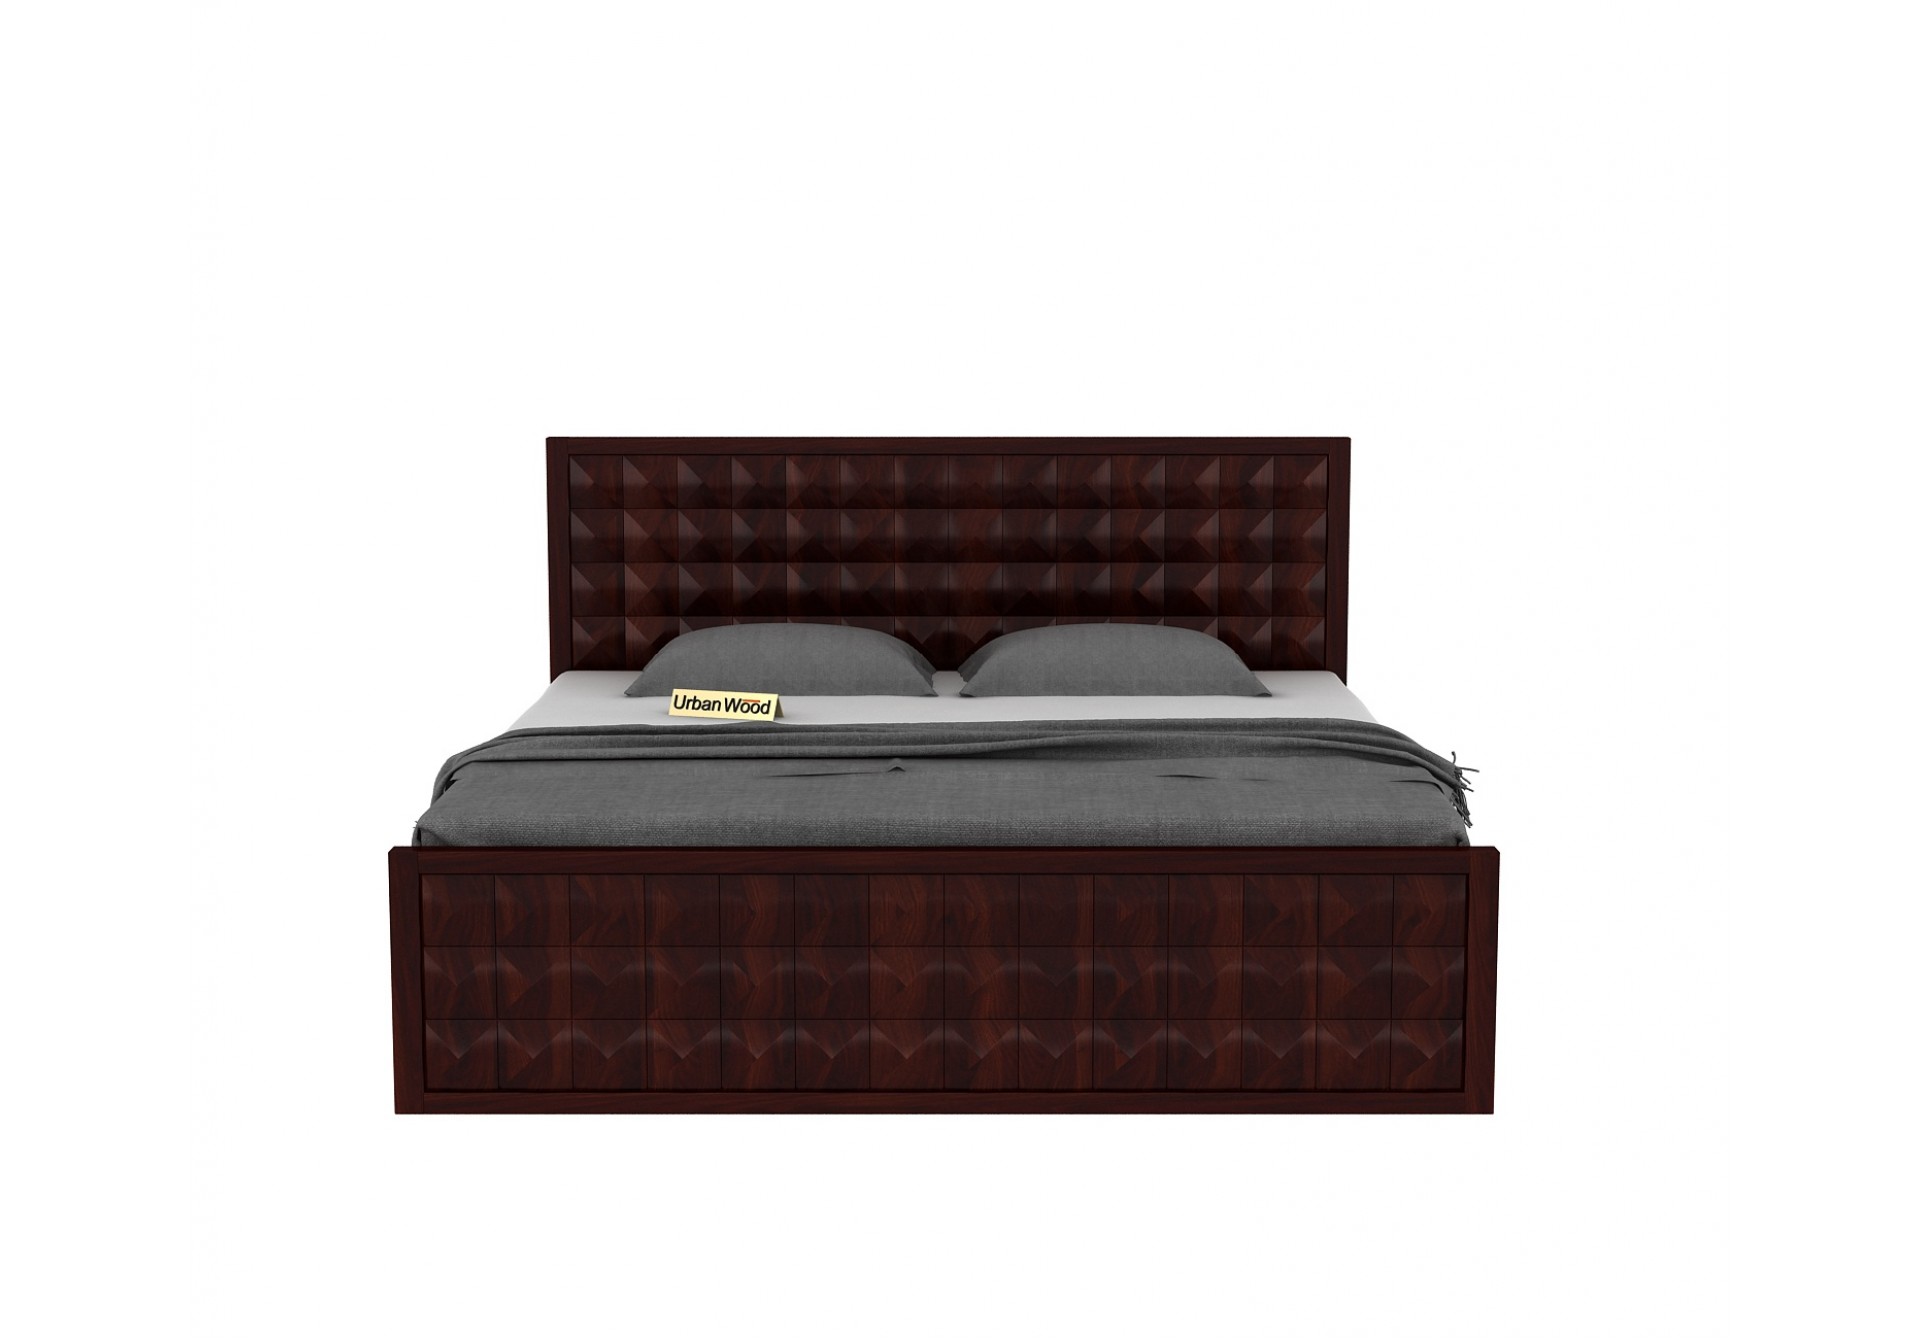 Morgana Bed With Storage ( Queen Size, Walnut Finish )